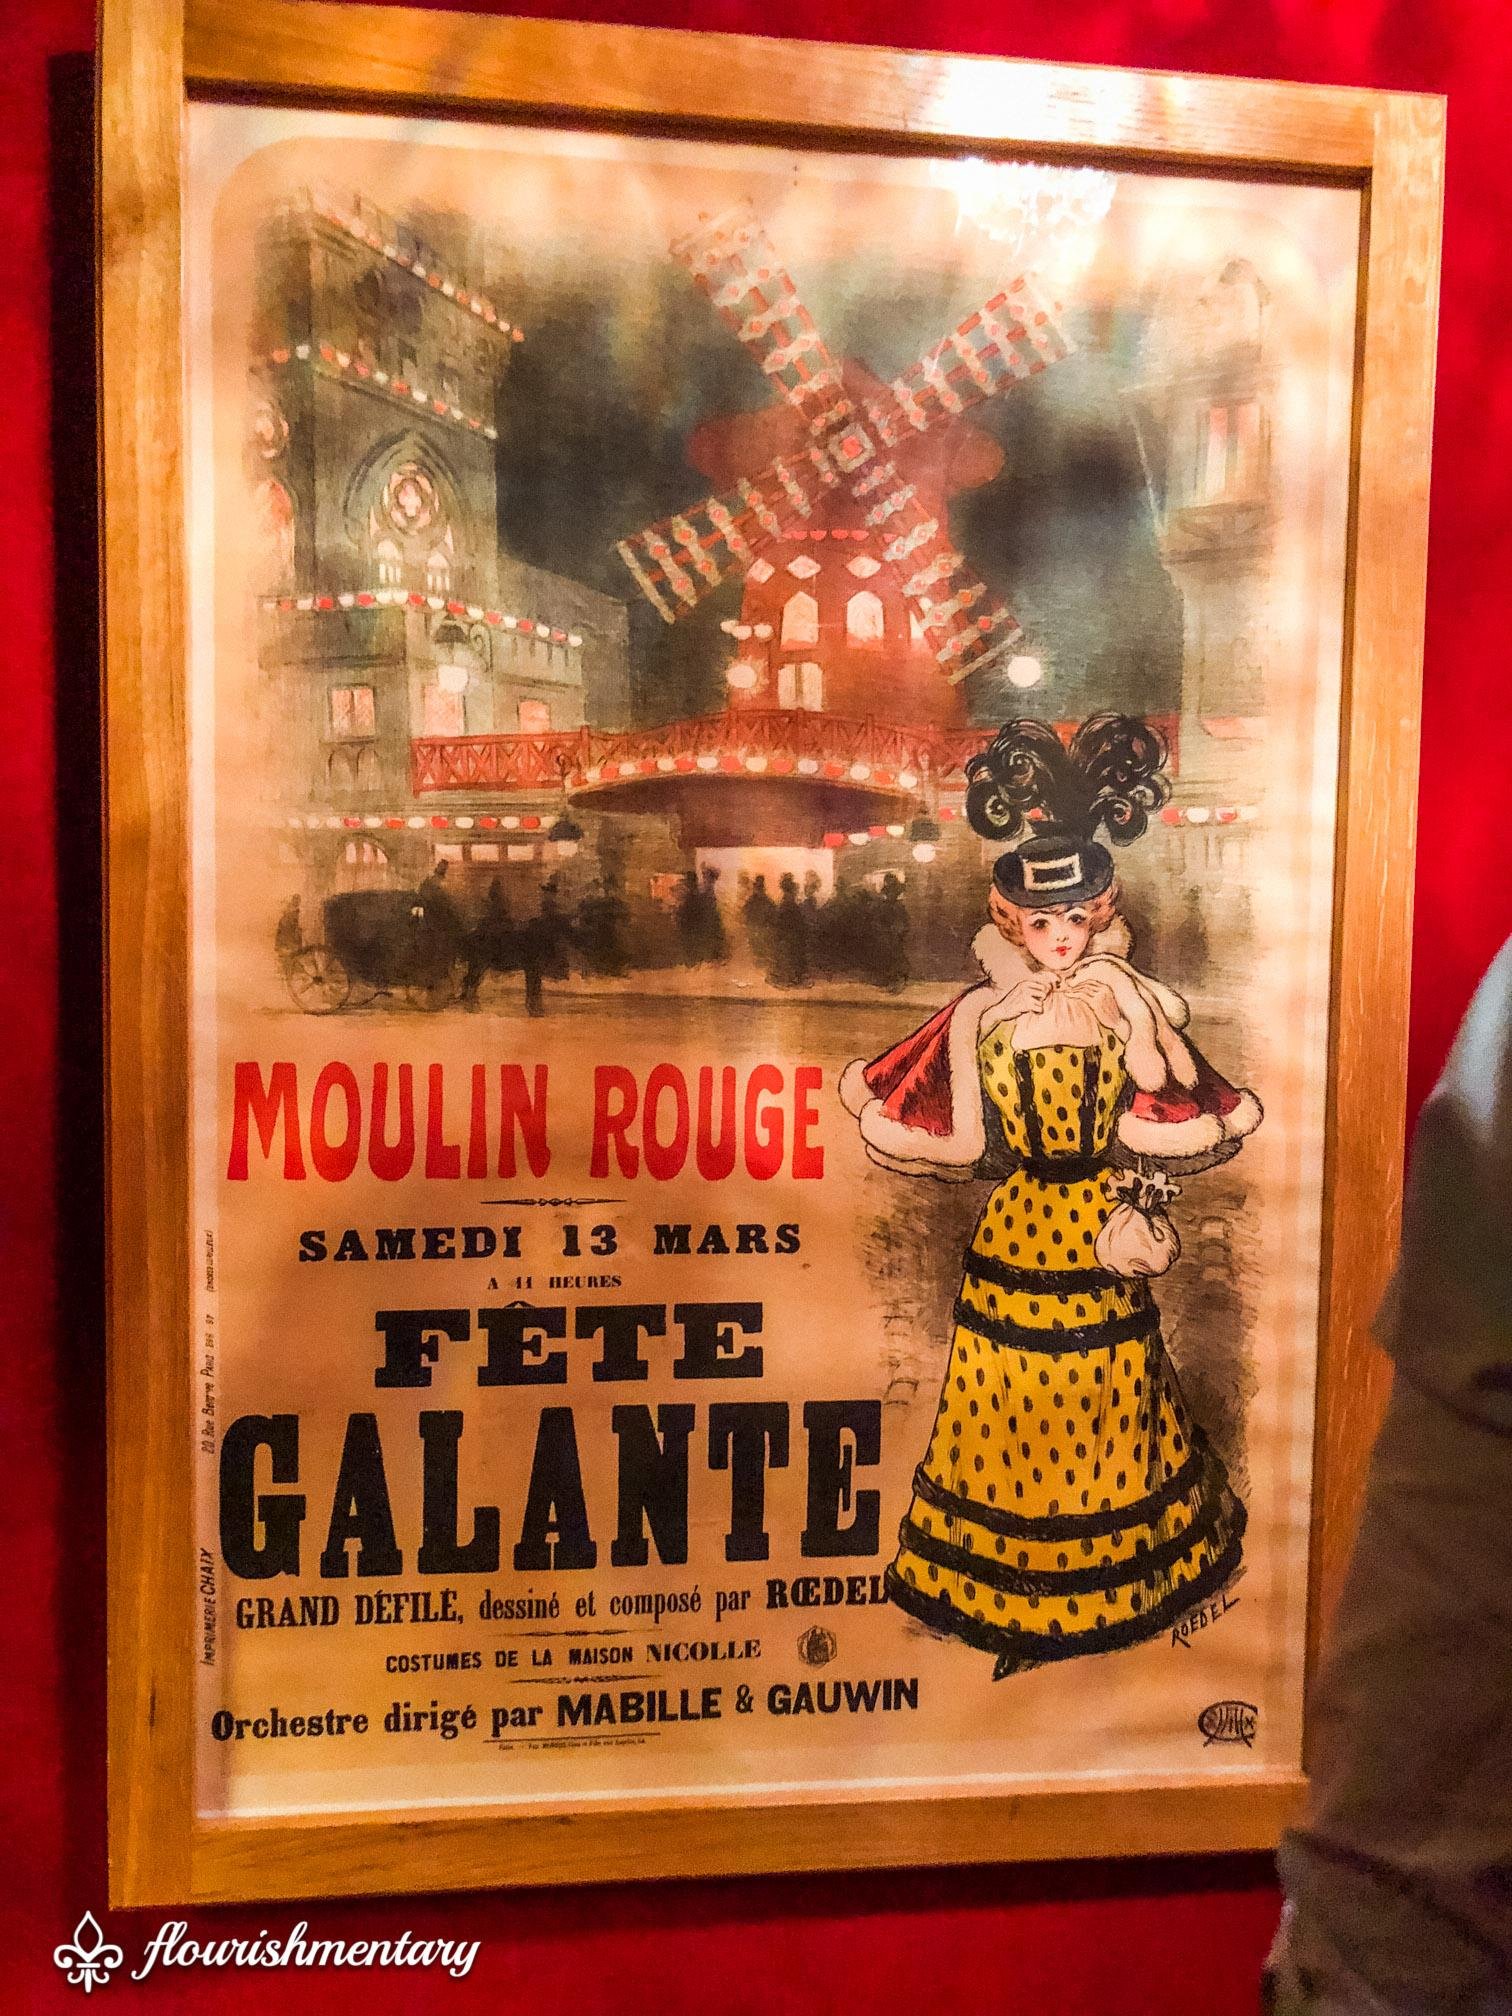 The moulin rouge 